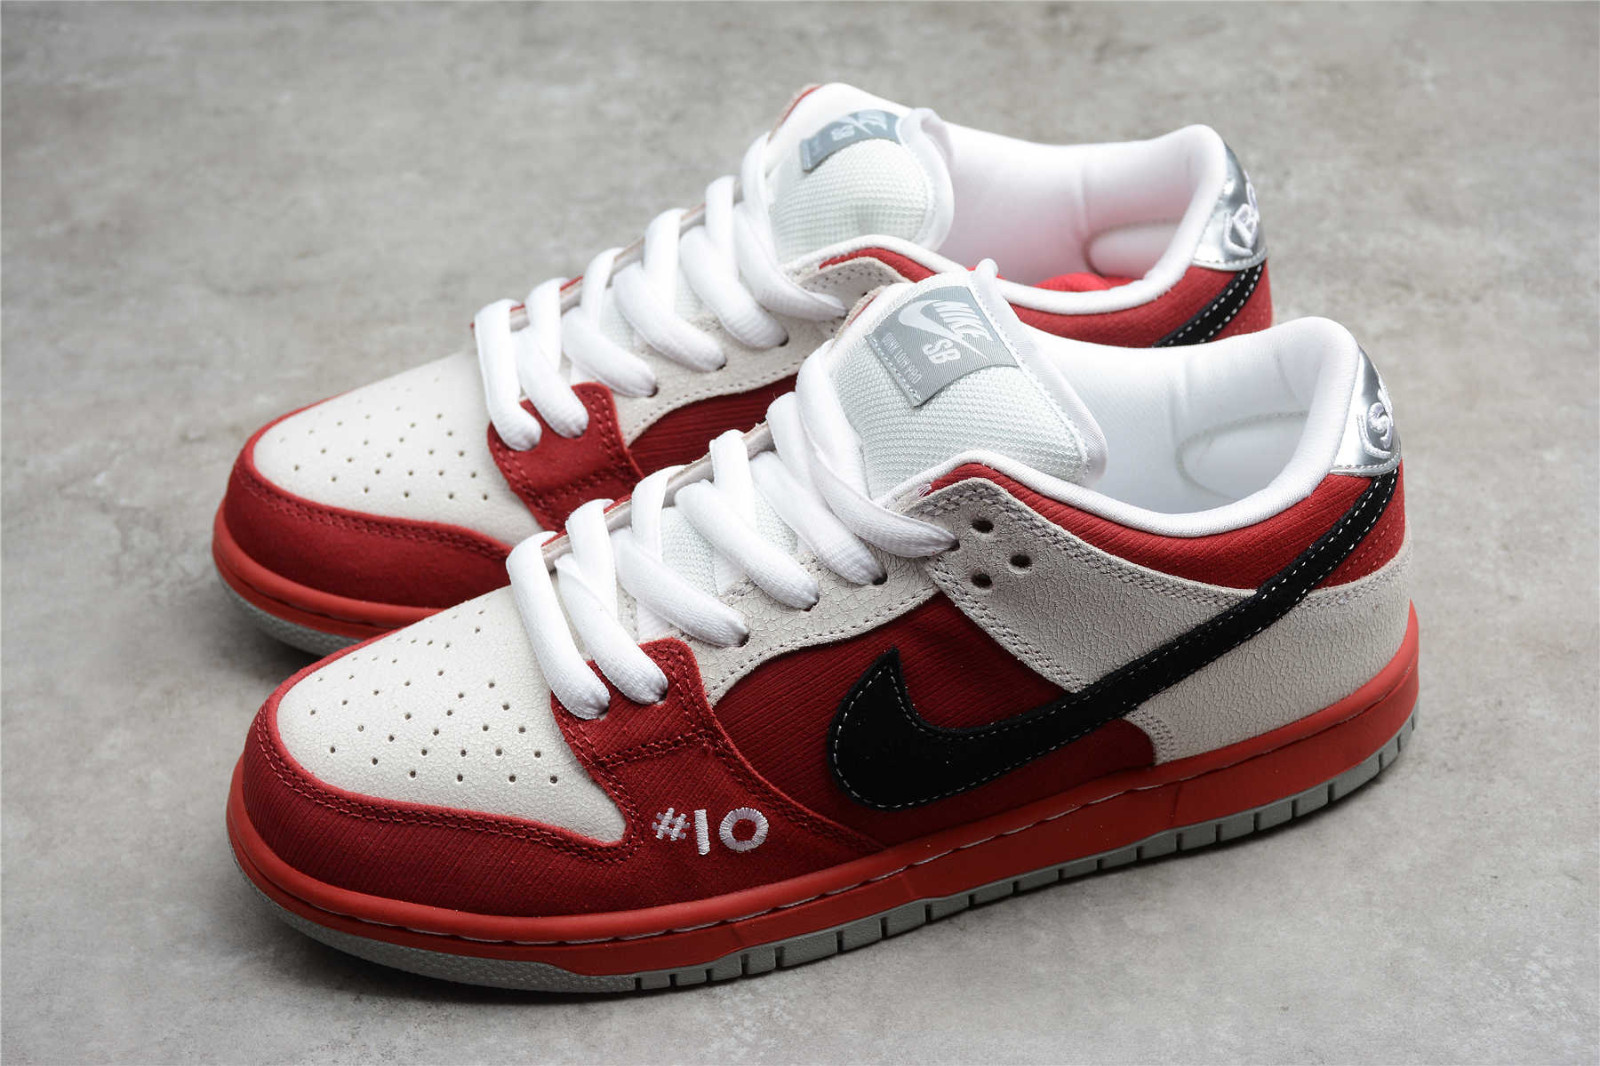 Nike Dunk Low USA DD1391-400 Release Date